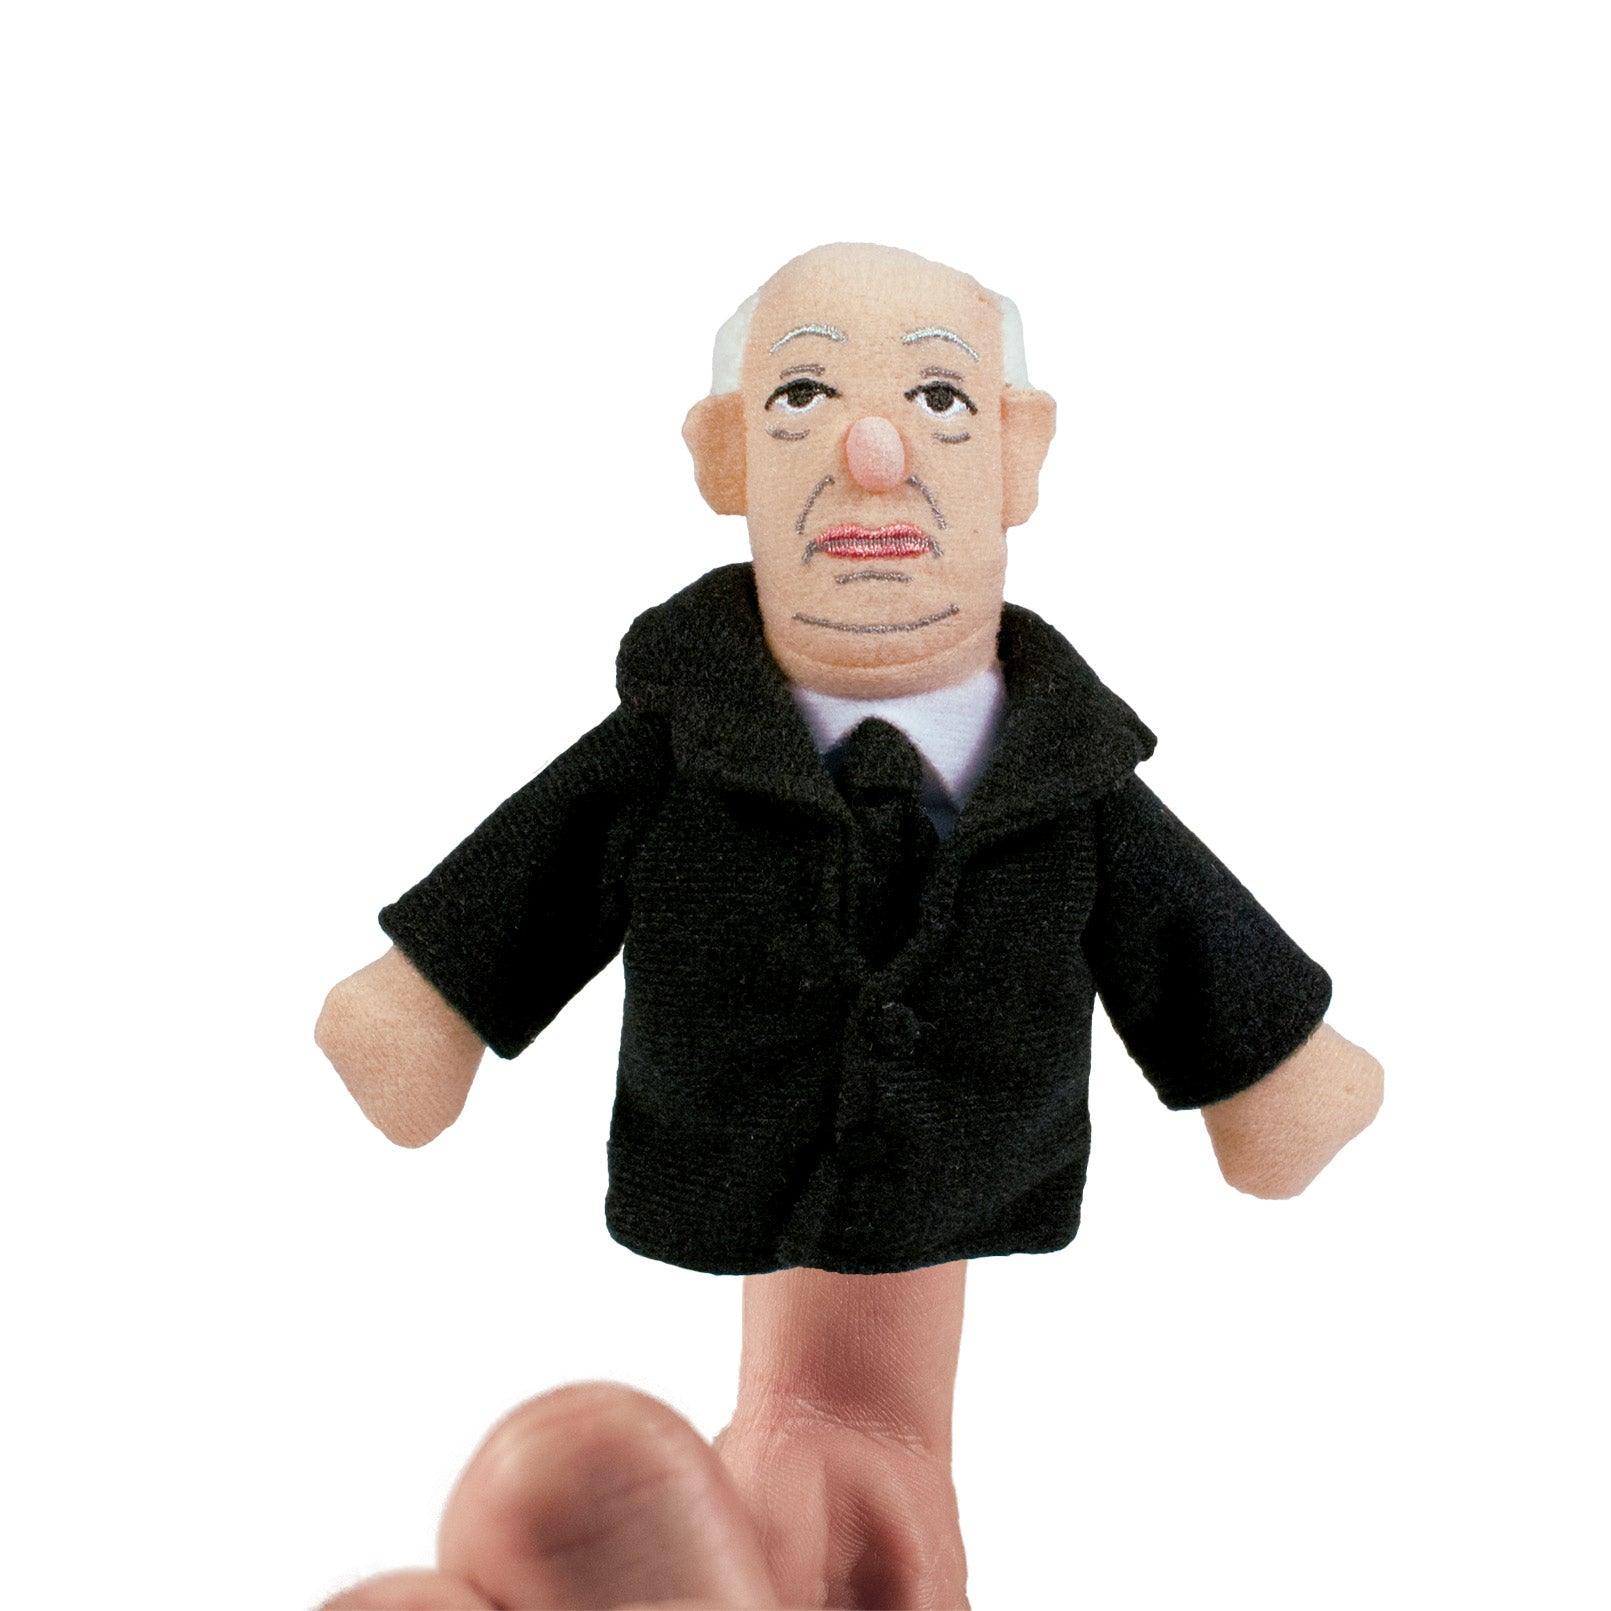 Product photo of Alfred Hitchcock Finger Puppet, a novelty gift manufactured by The Unemployed Philosophers Guild.